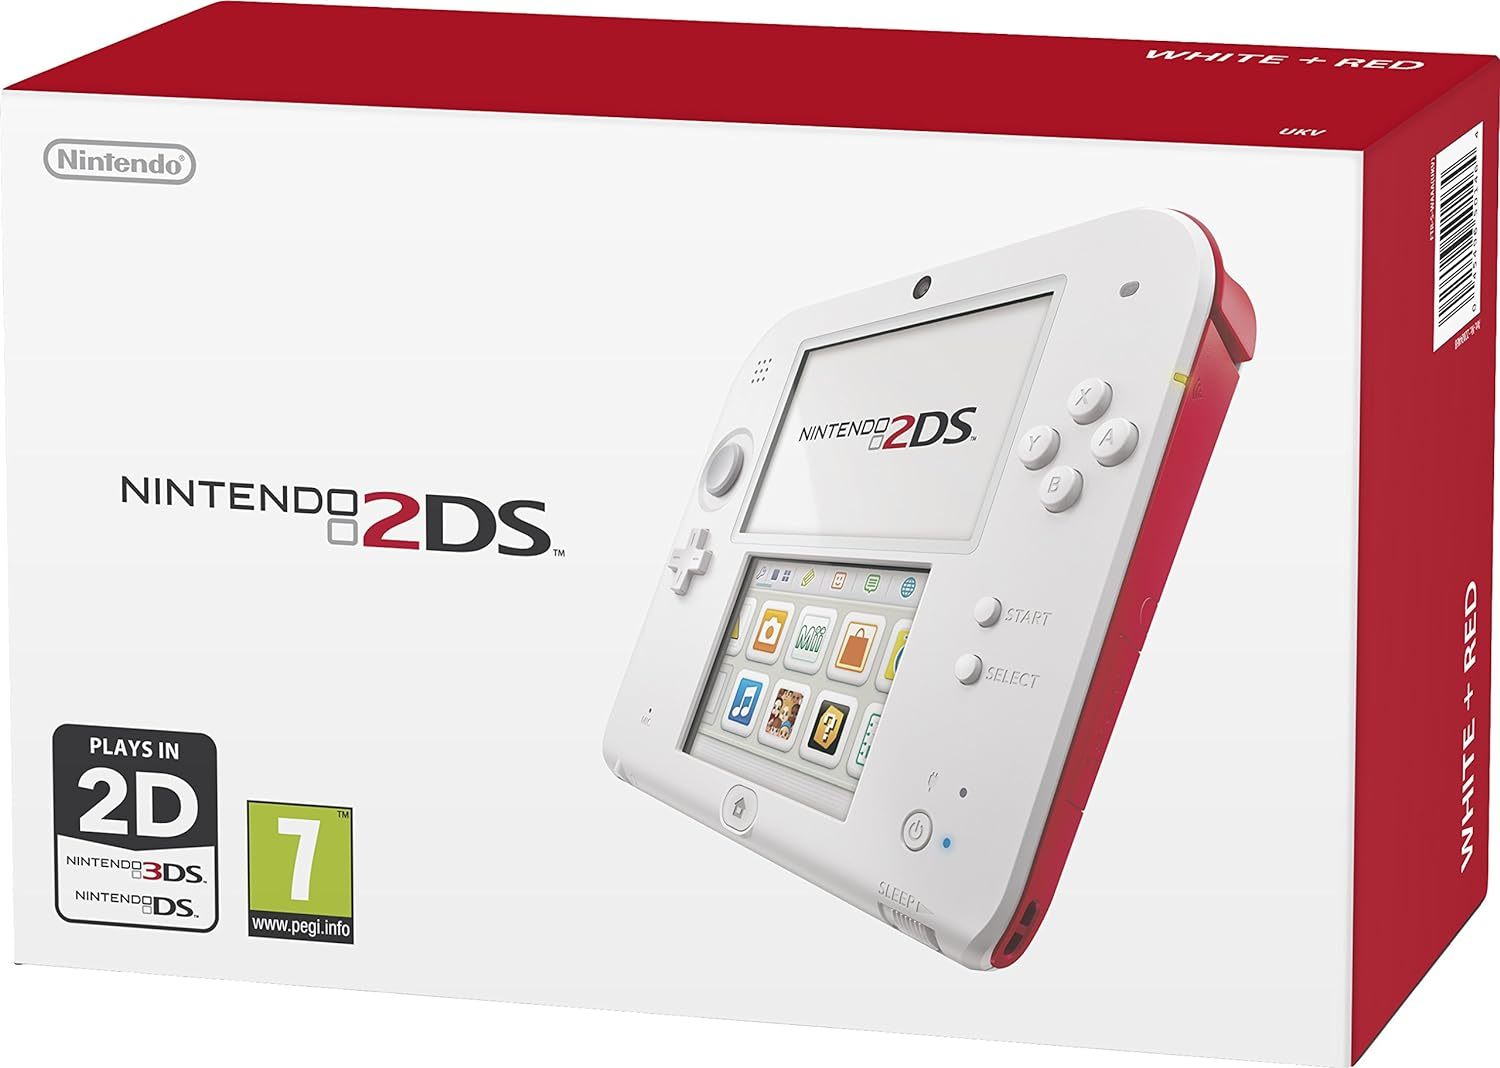 Nintendo Handheld Console 2Ds - White/Red - $204.99